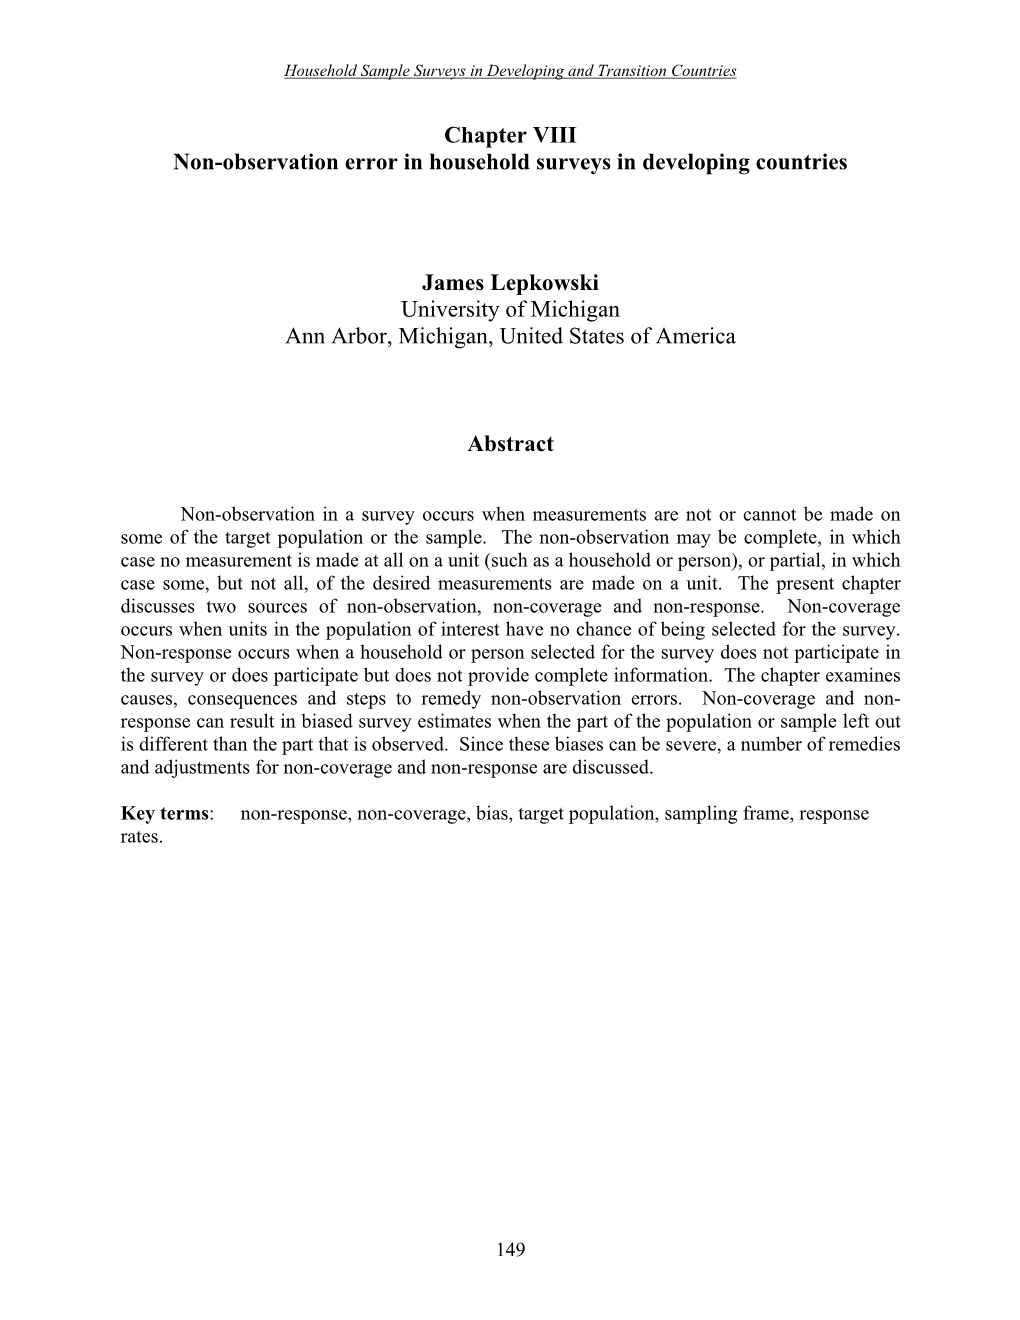 Chapter VIII Non-Observation Error in Household Surveys in Developing Countries